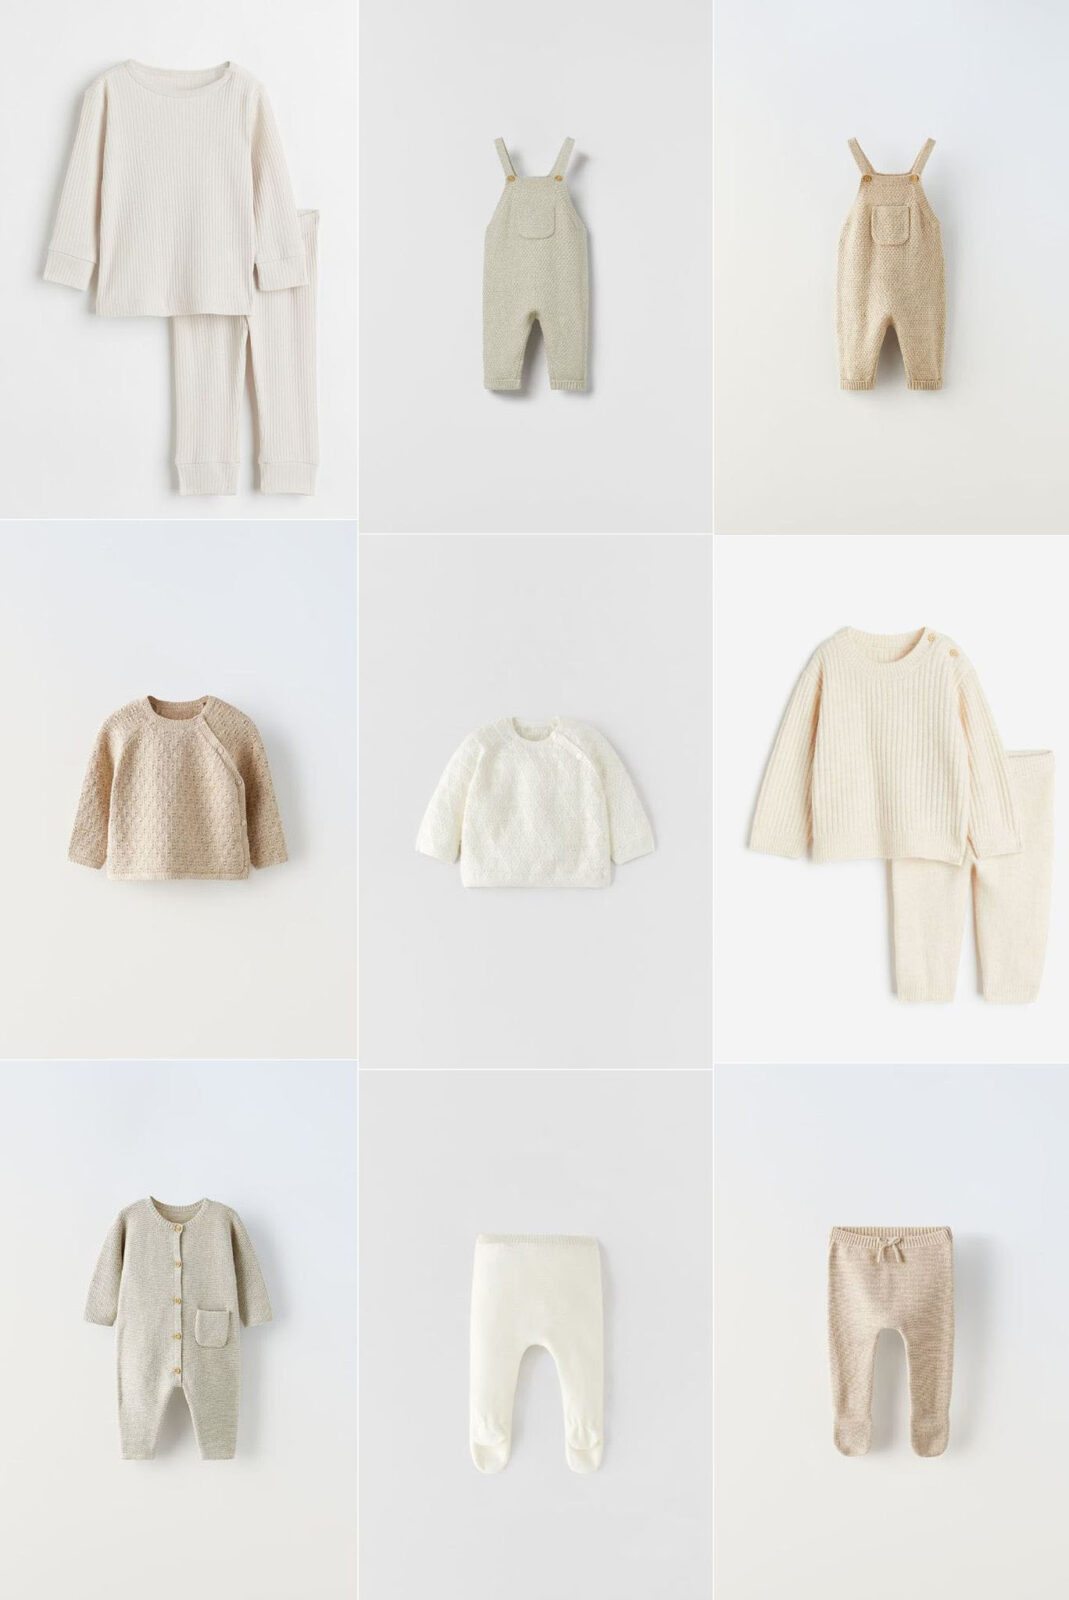 Simple options when discussing what to wear for family photos including ivory, muted colors, and tans to create a timeless look.